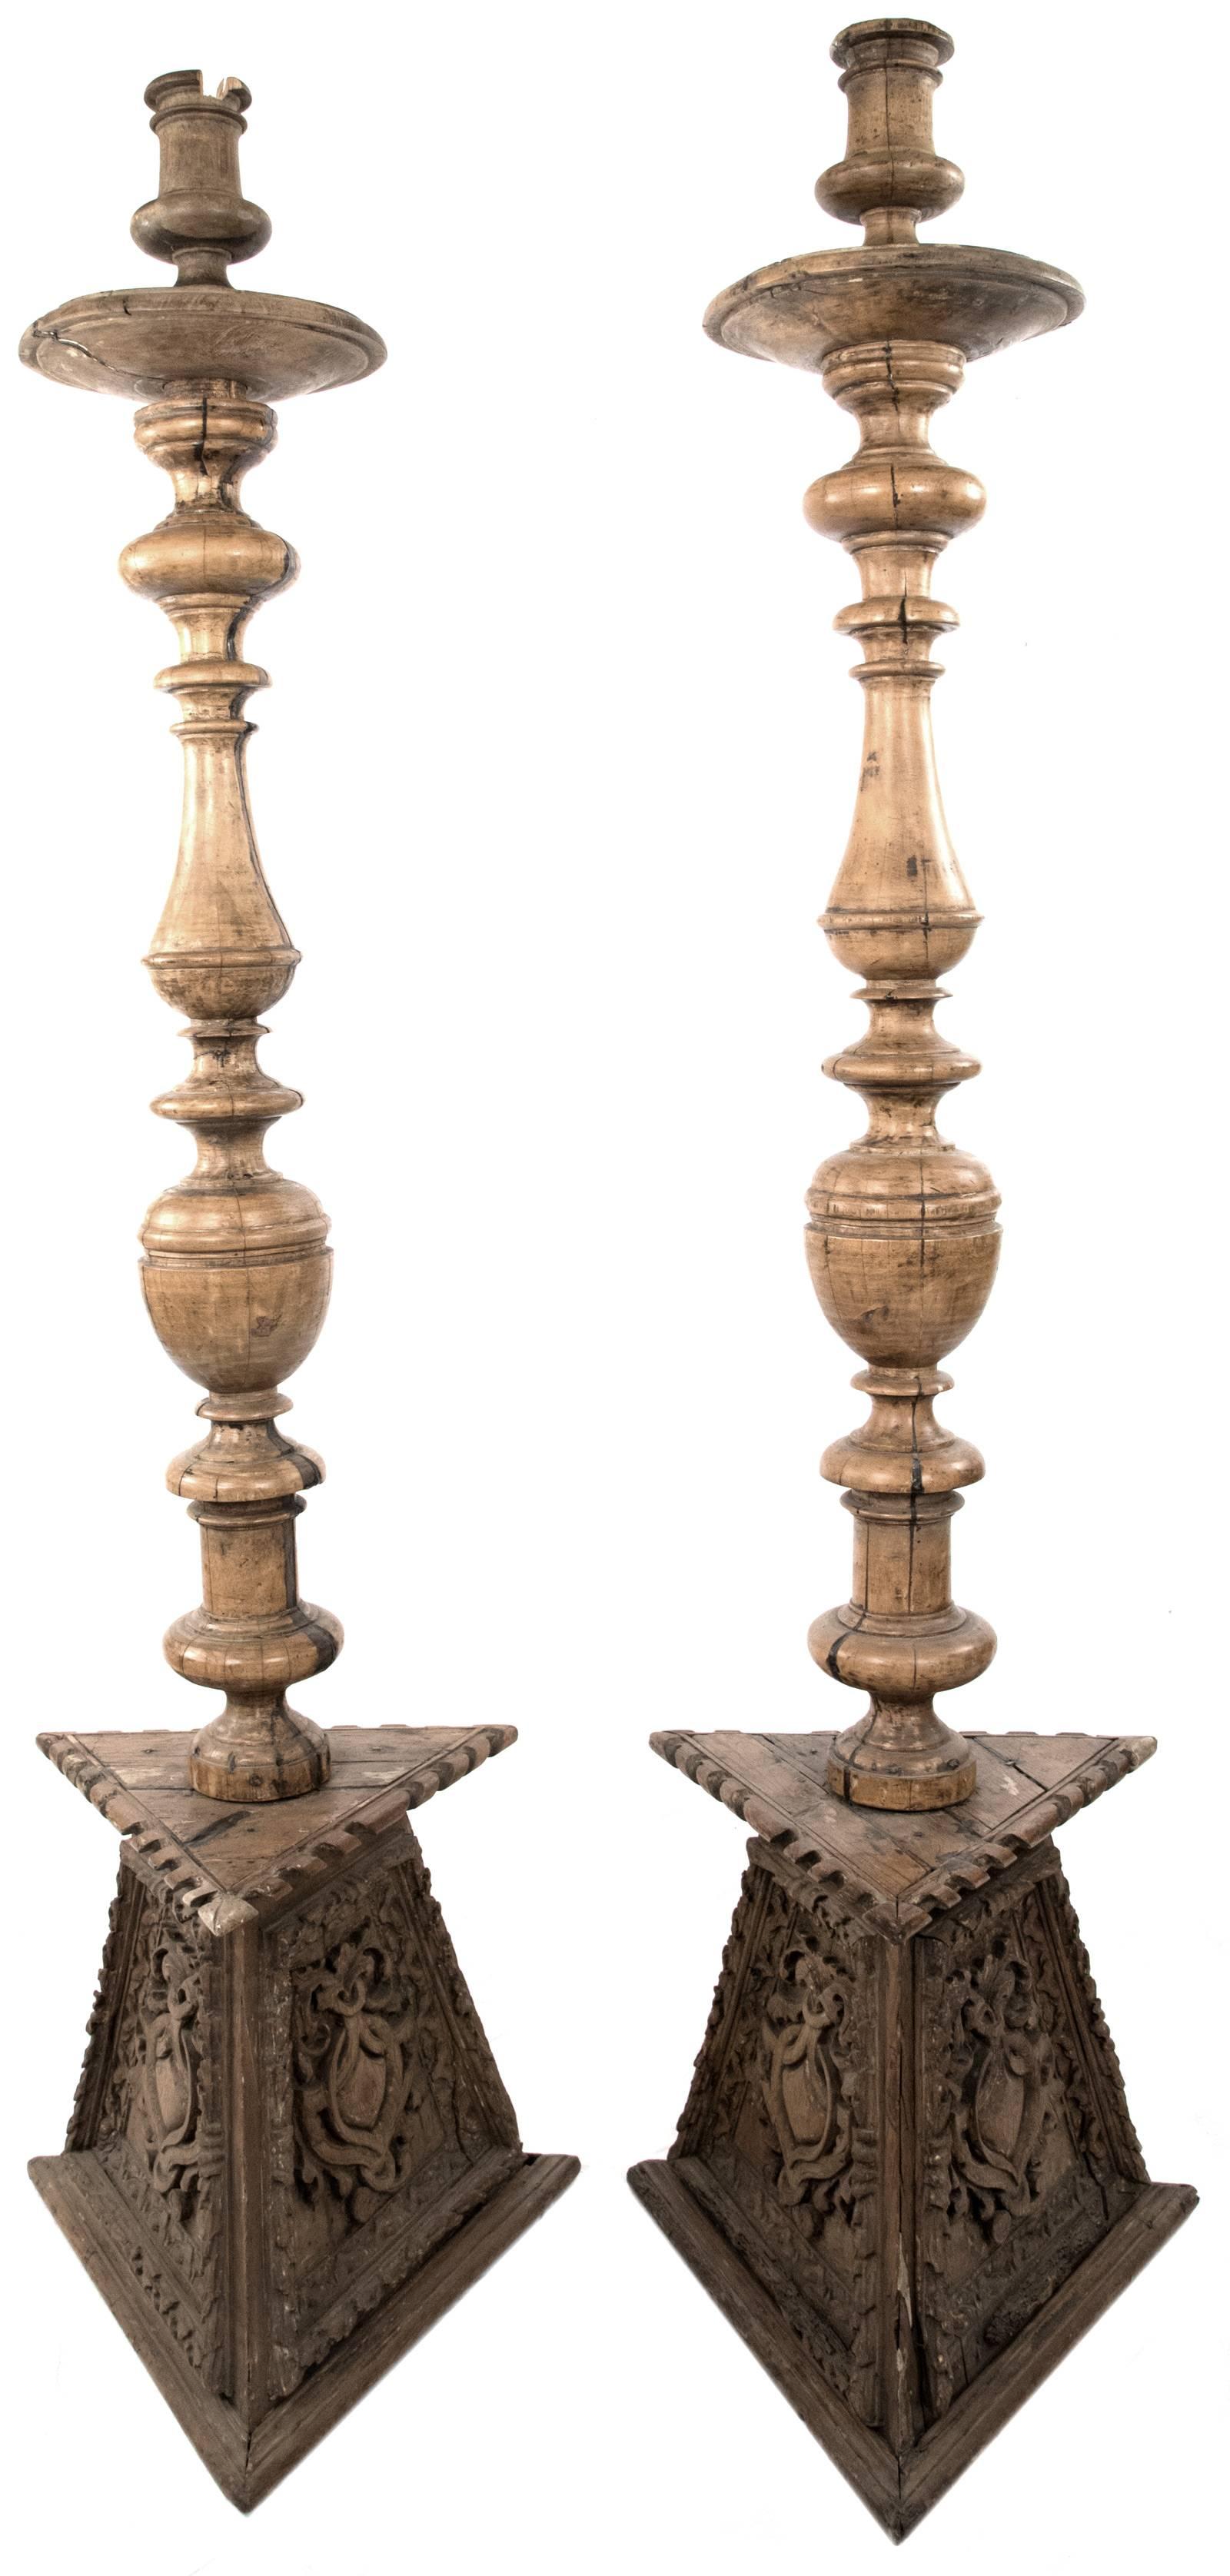 Two 18th century carved and turned fruitwood candelabras, made in Northern Italy. The sides of the three-sided bases are carved with crests surrounded by acanthus leaves and decorative dental work. The stems are made from thick and beautifully aged